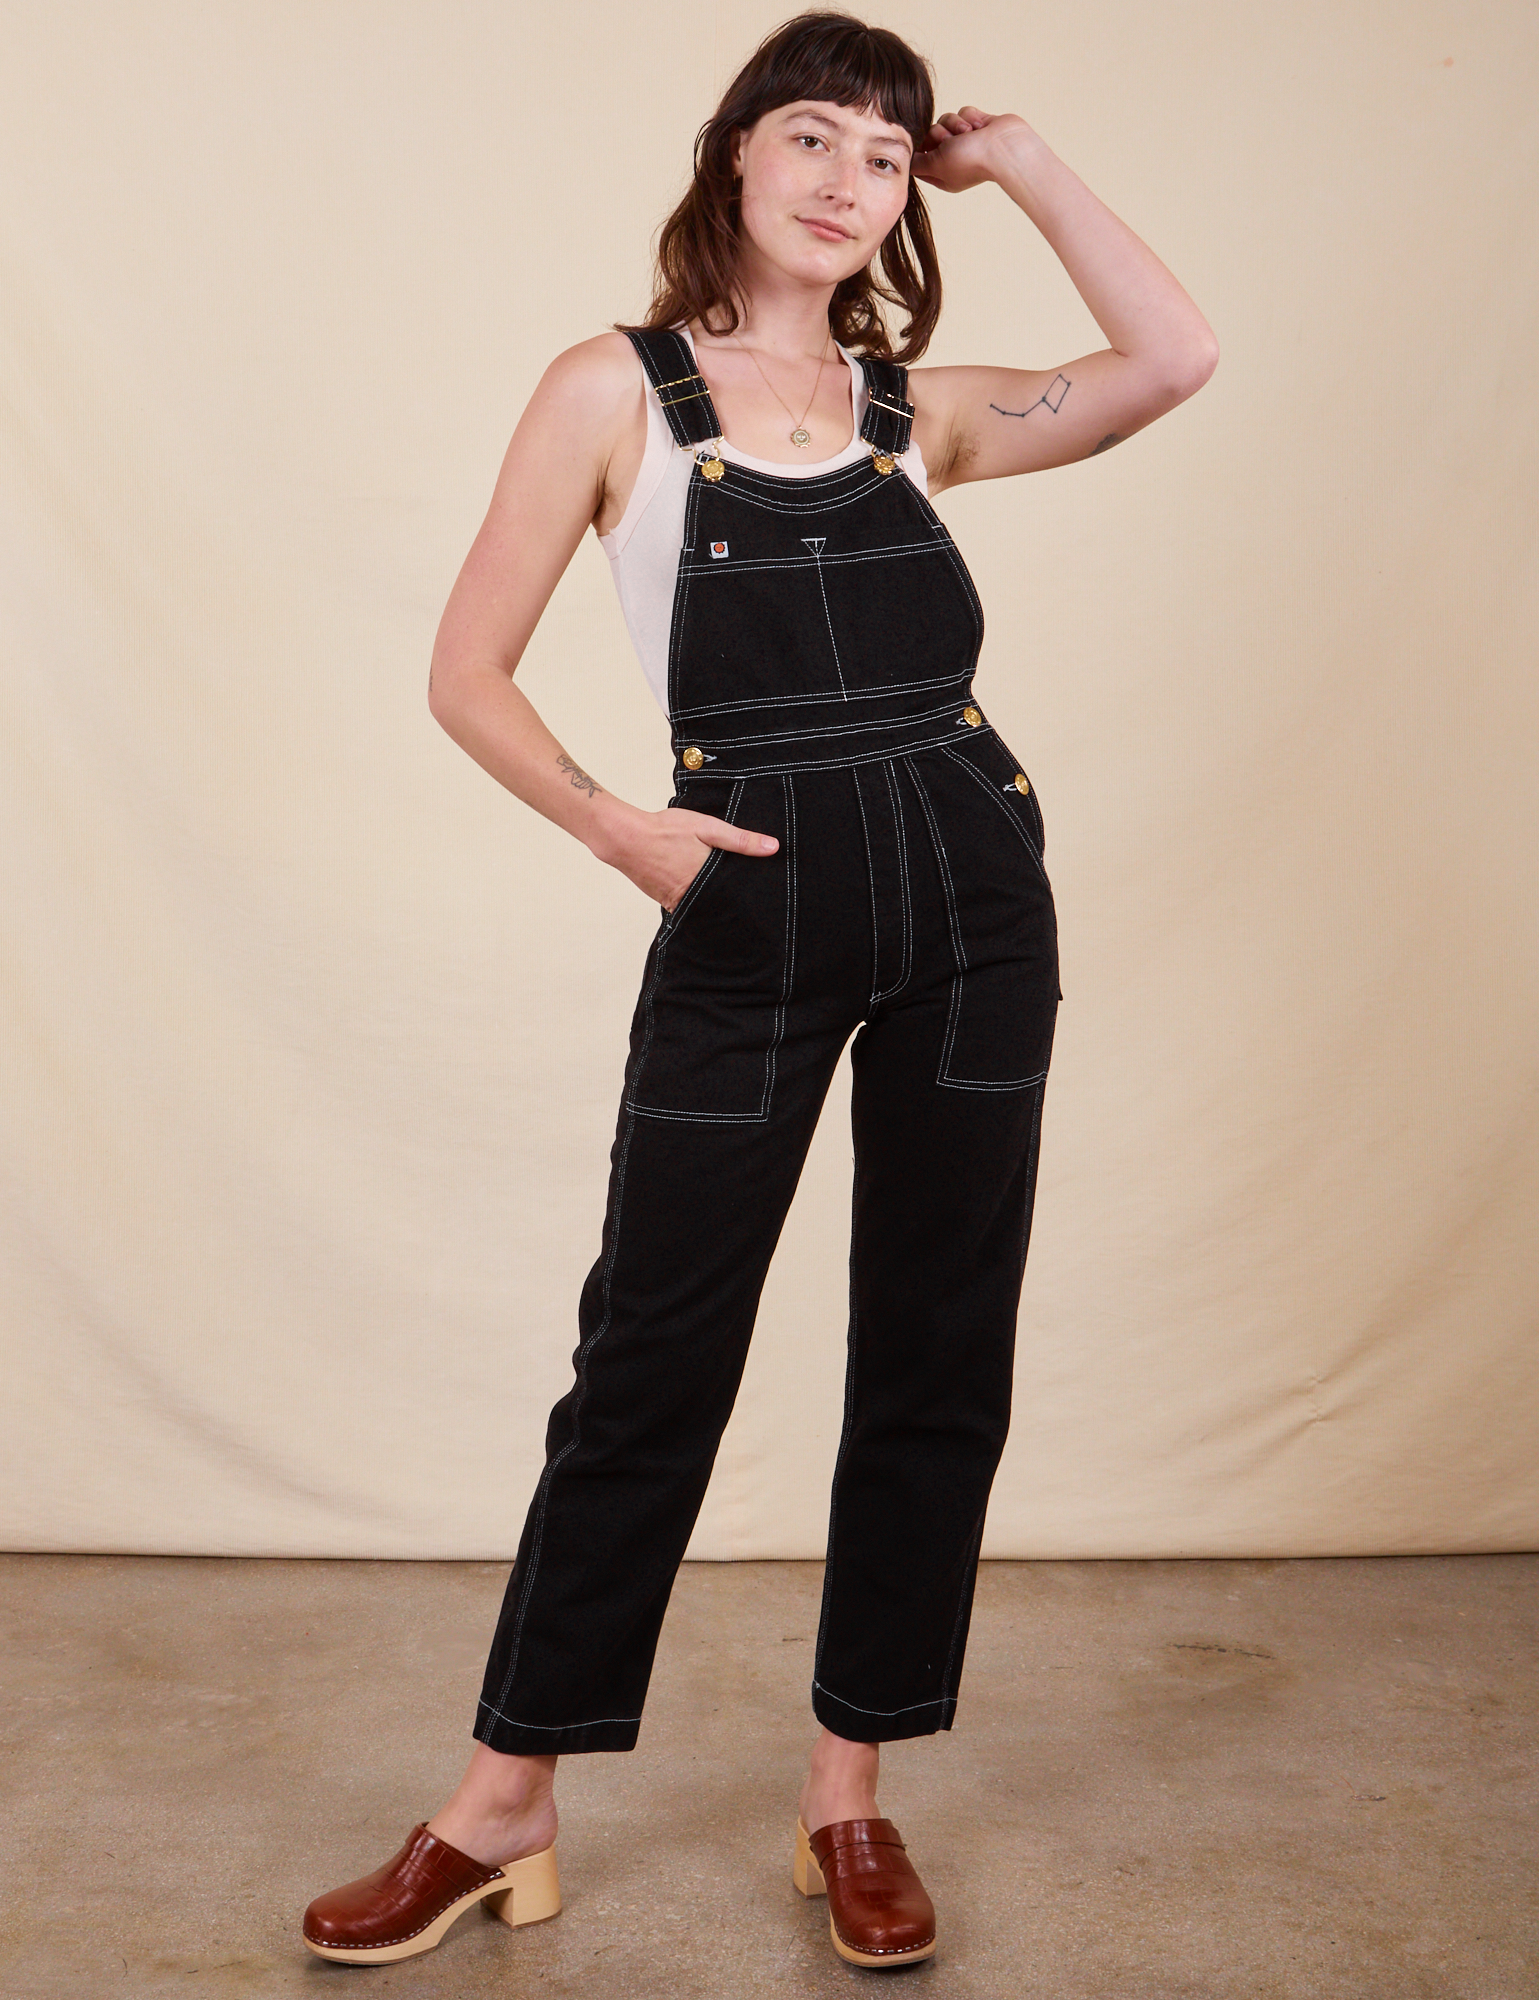 Alex is 5&#39;8&quot;and wearing P Original Overalls in Basic Black